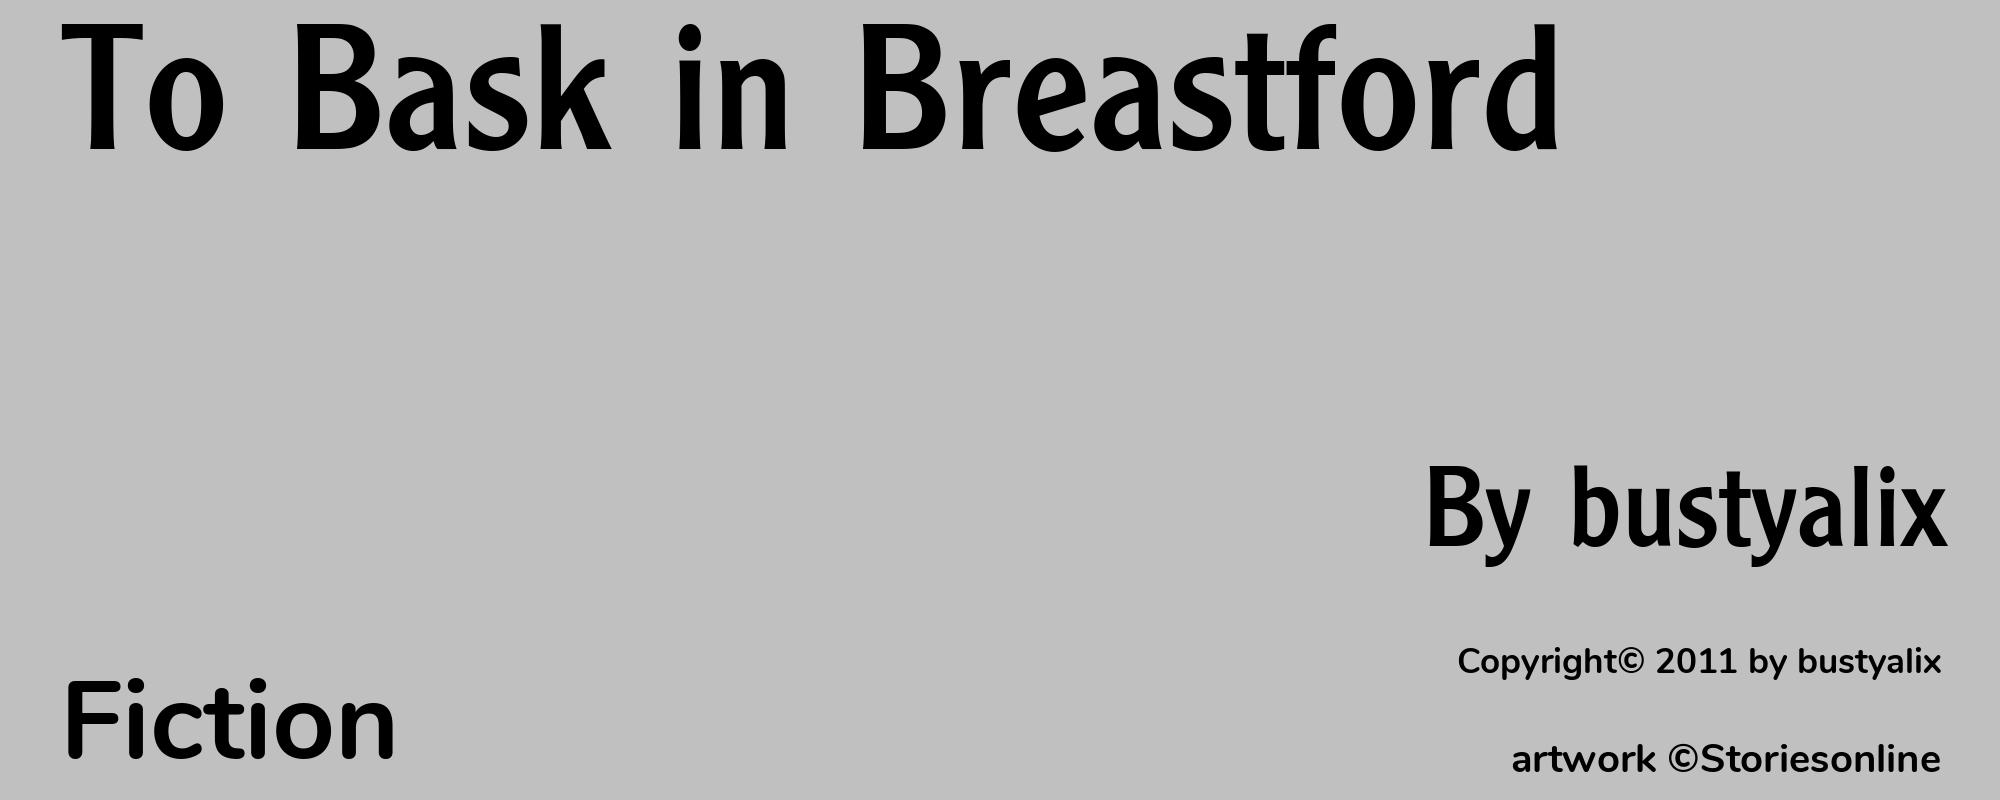 To Bask in Breastford  - Cover